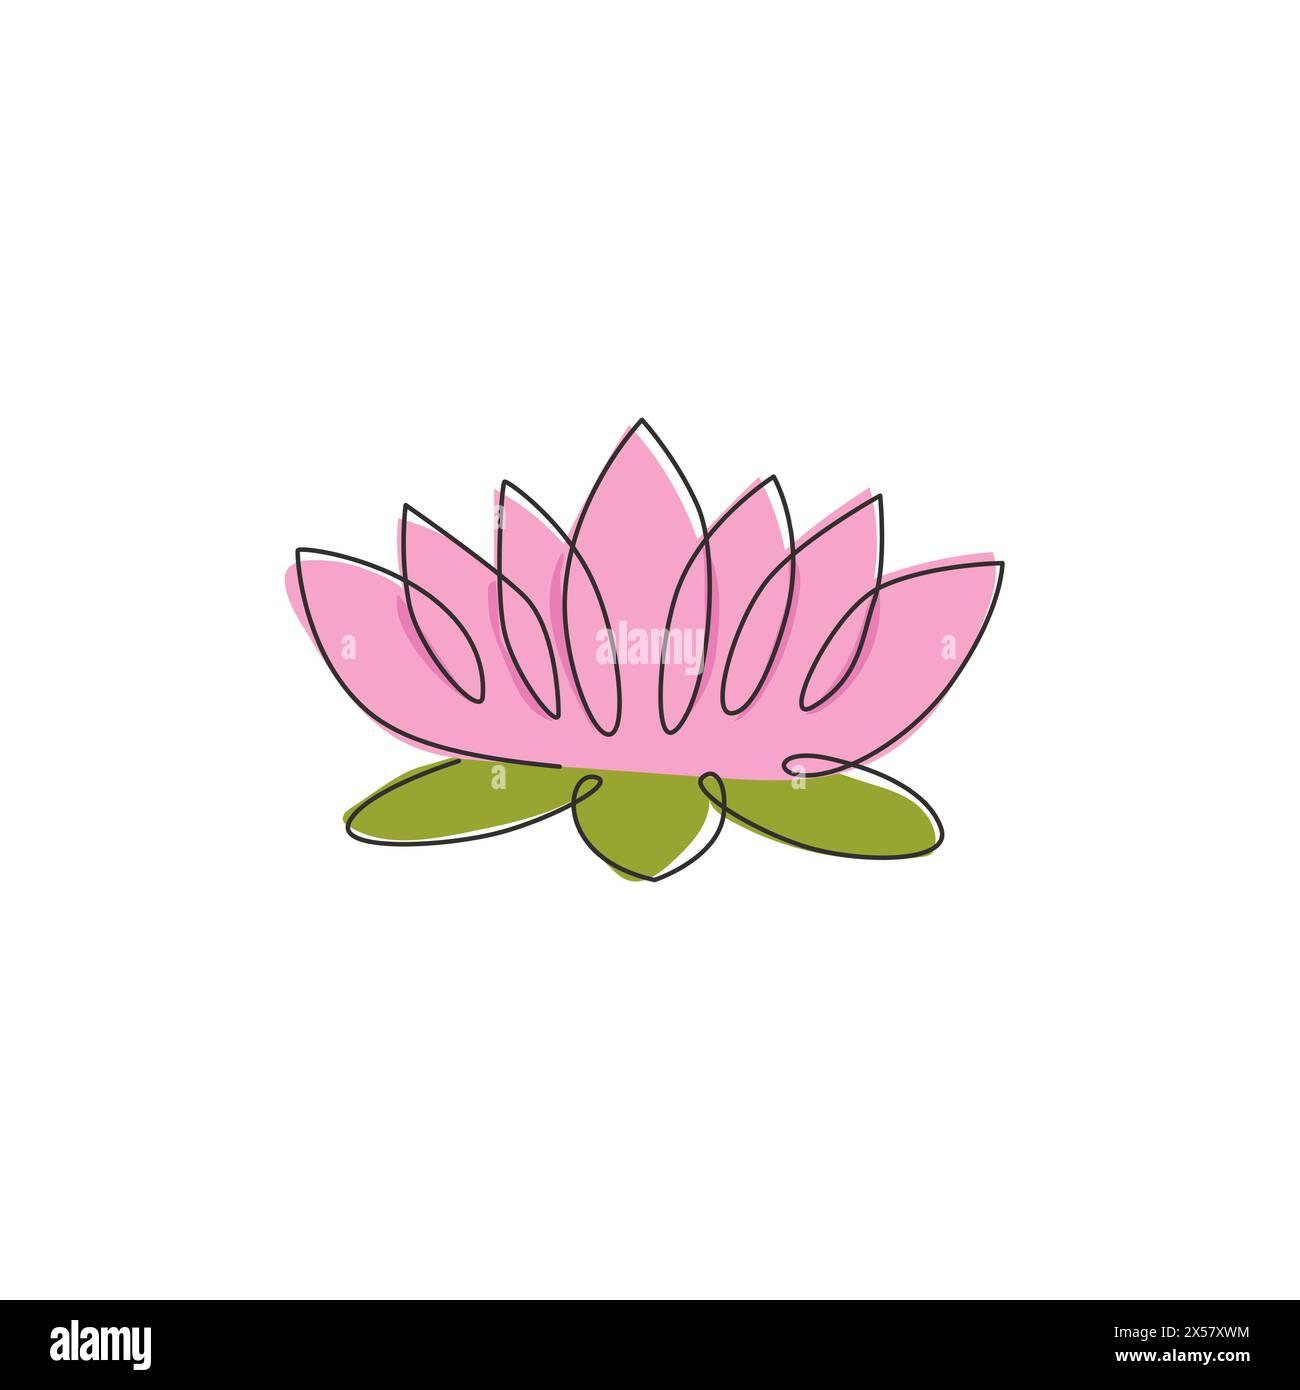 Single continuous line drawing of beauty fresh lotus for salon relaxation therapy business logo. Decorative water lily flower concept for home wall de Stock Vector